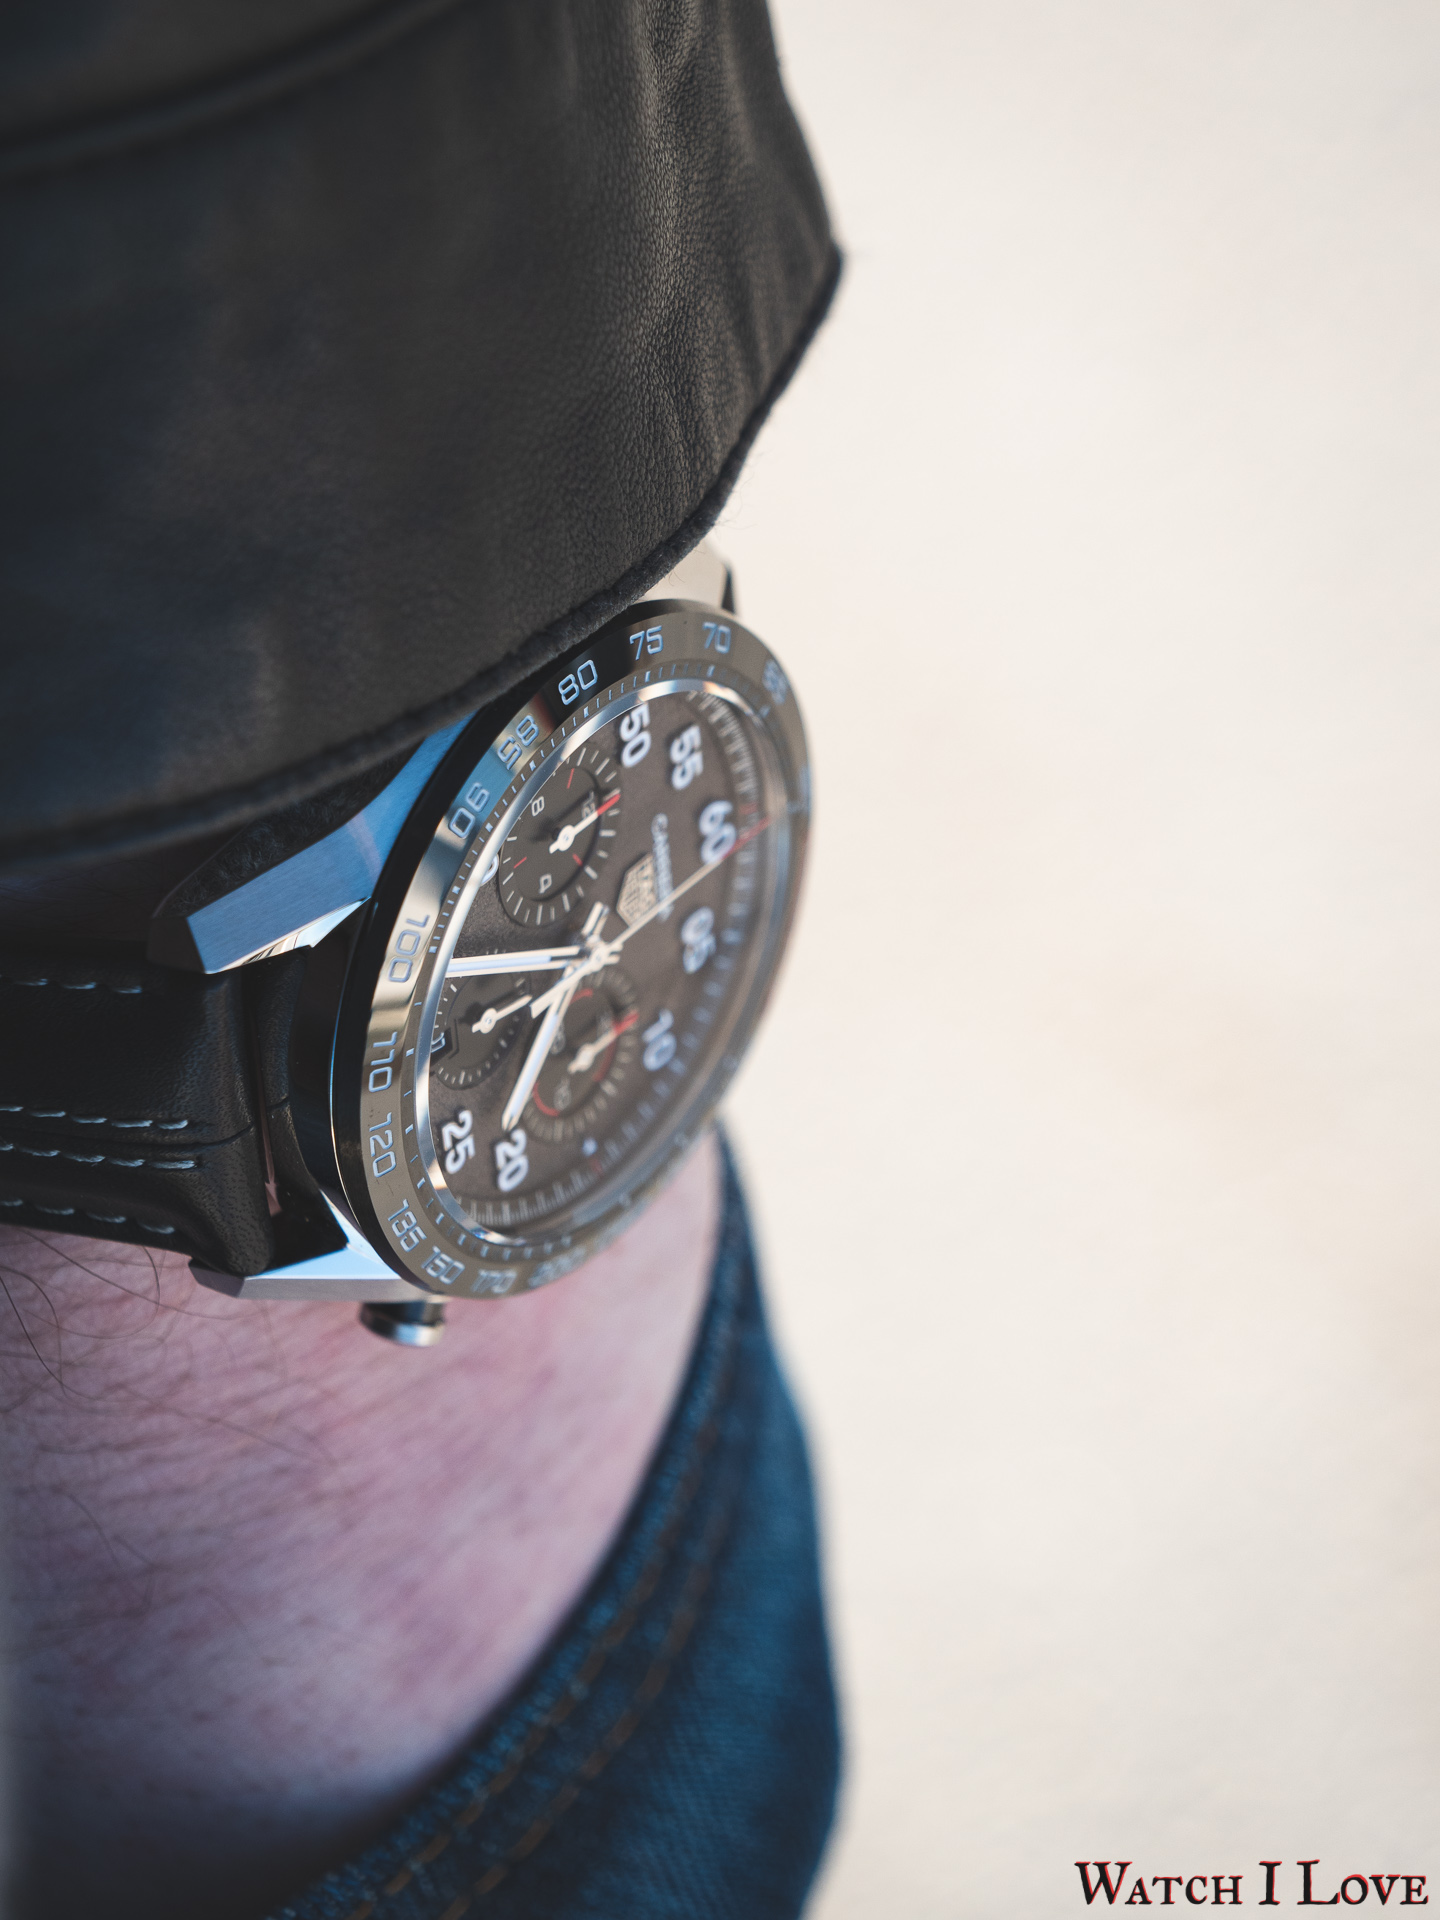 Review TAG Heuer Carrera Porsche Chronograph Special Edition - Watch I Love